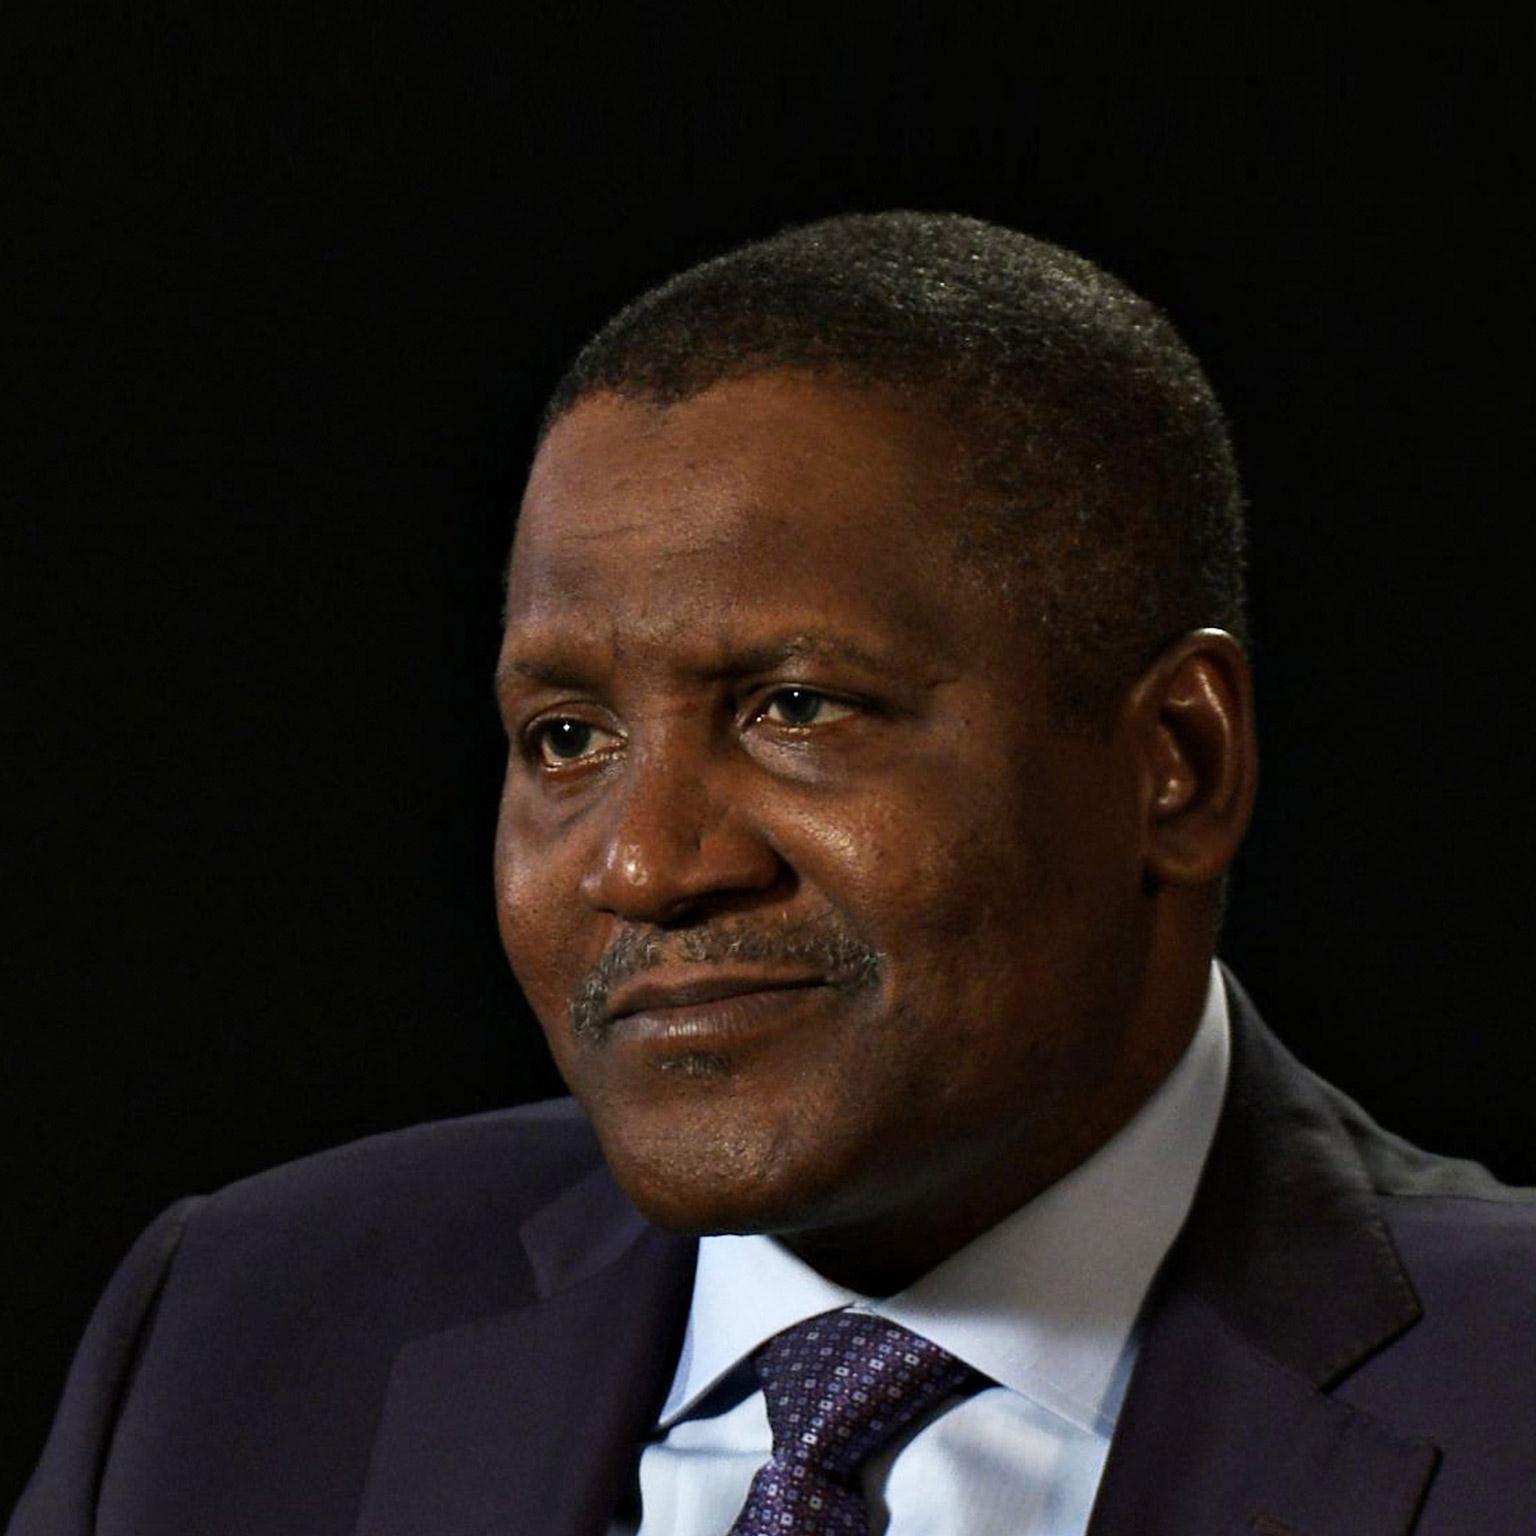 Dangote Group on the Africa opportunity | McKinsey